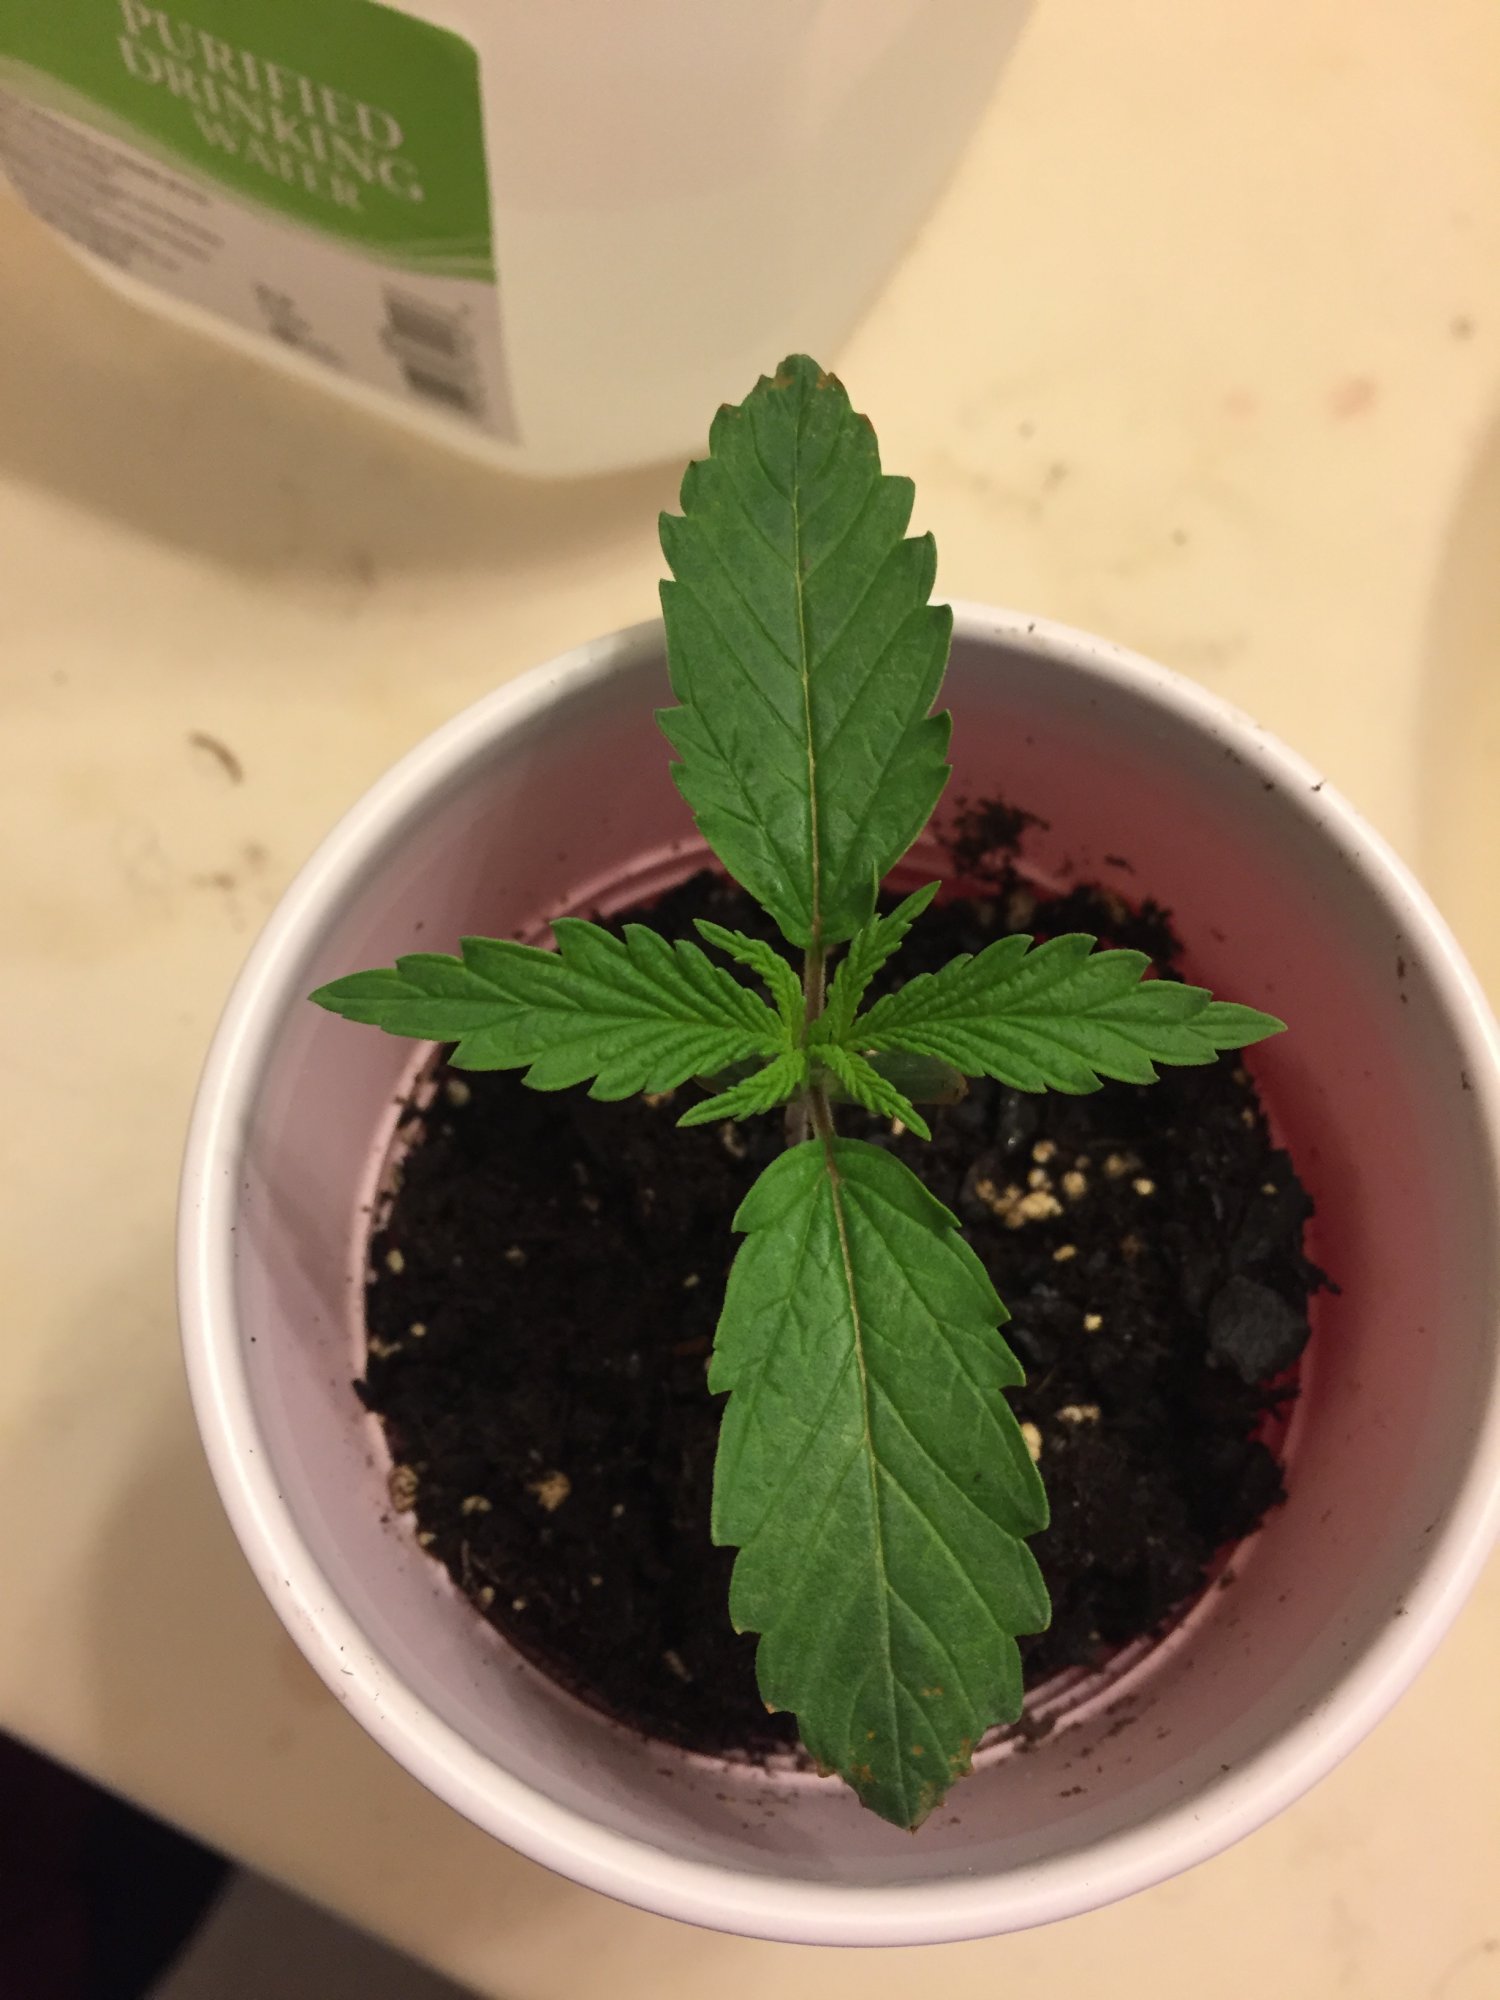 Is my plant healthy